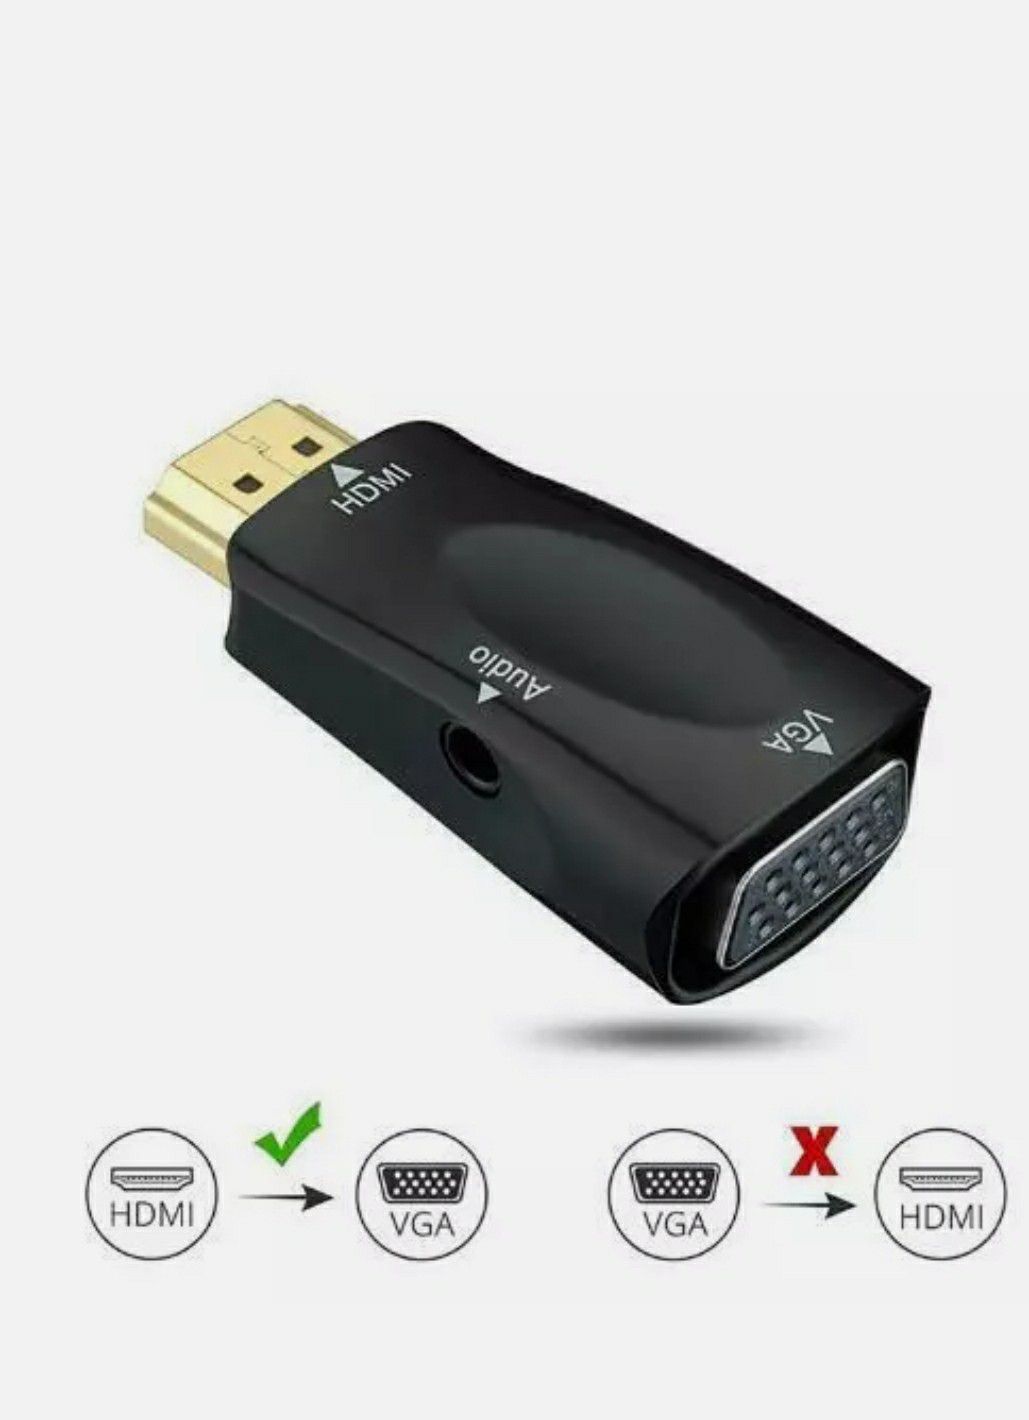 HDMI Male to VGA Female Adapter Converter with Audio Output Cable -